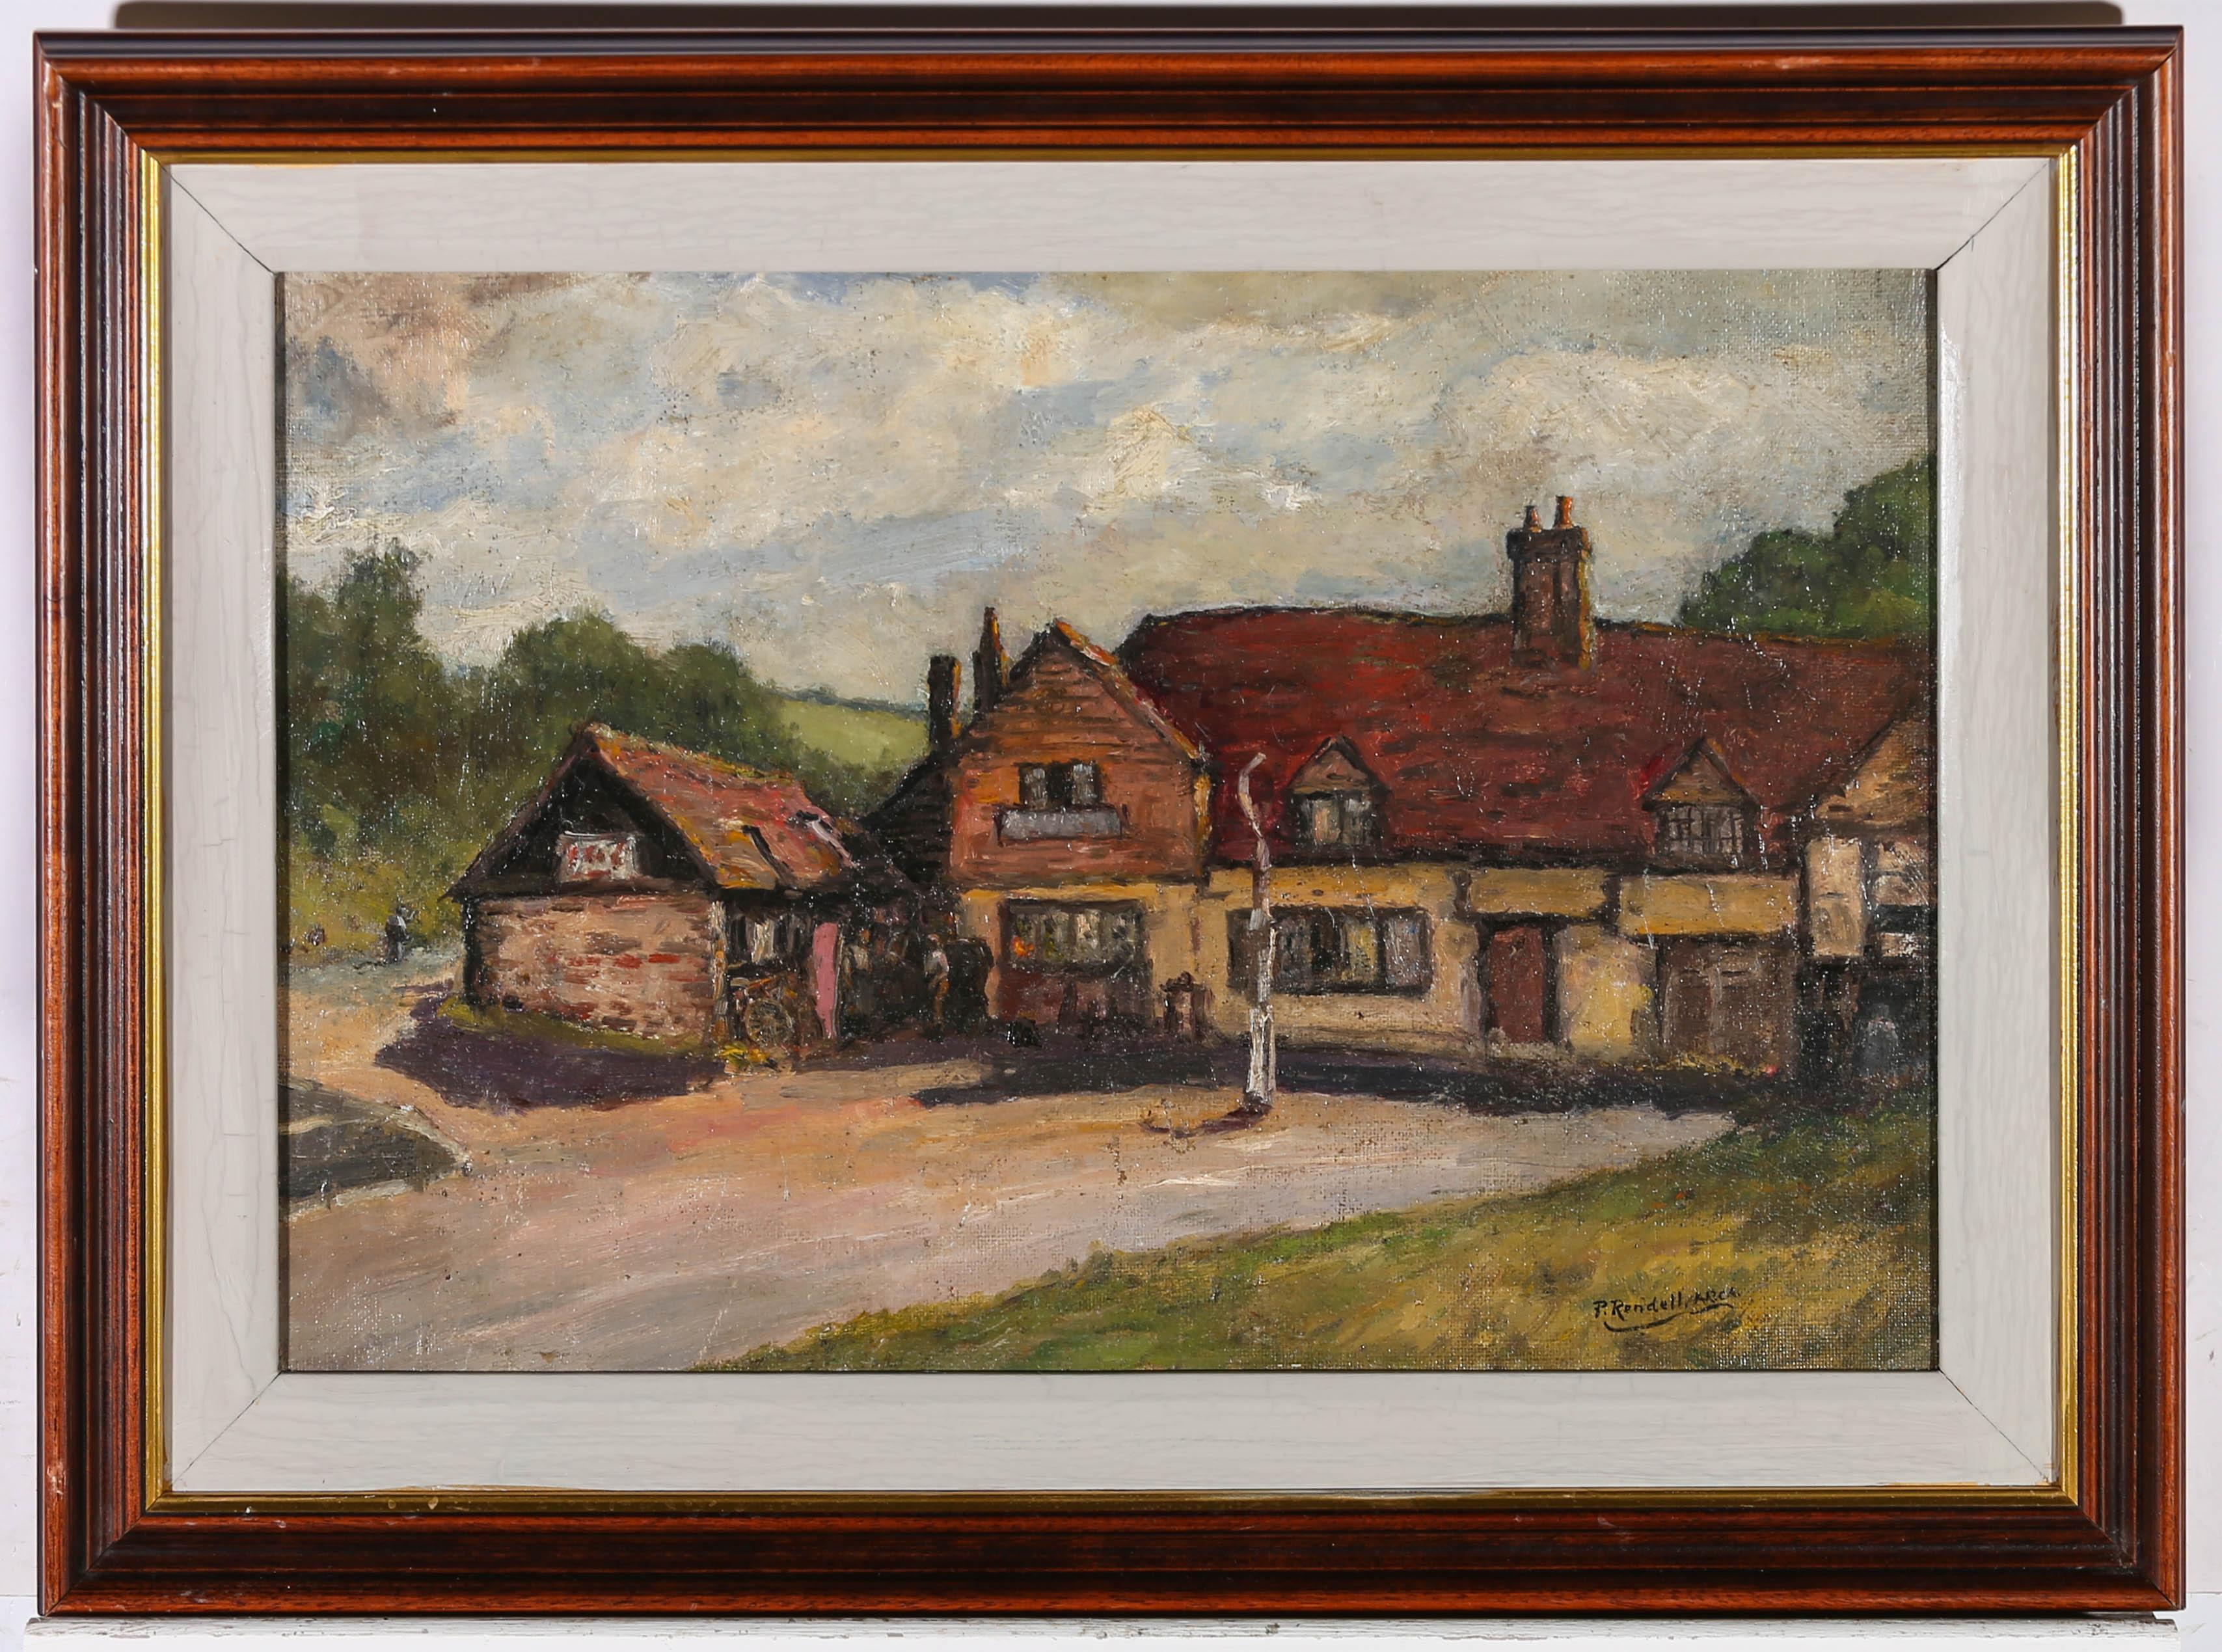 Well presented in a dark wood frame with gilt detail. Signed. On canvas board.
